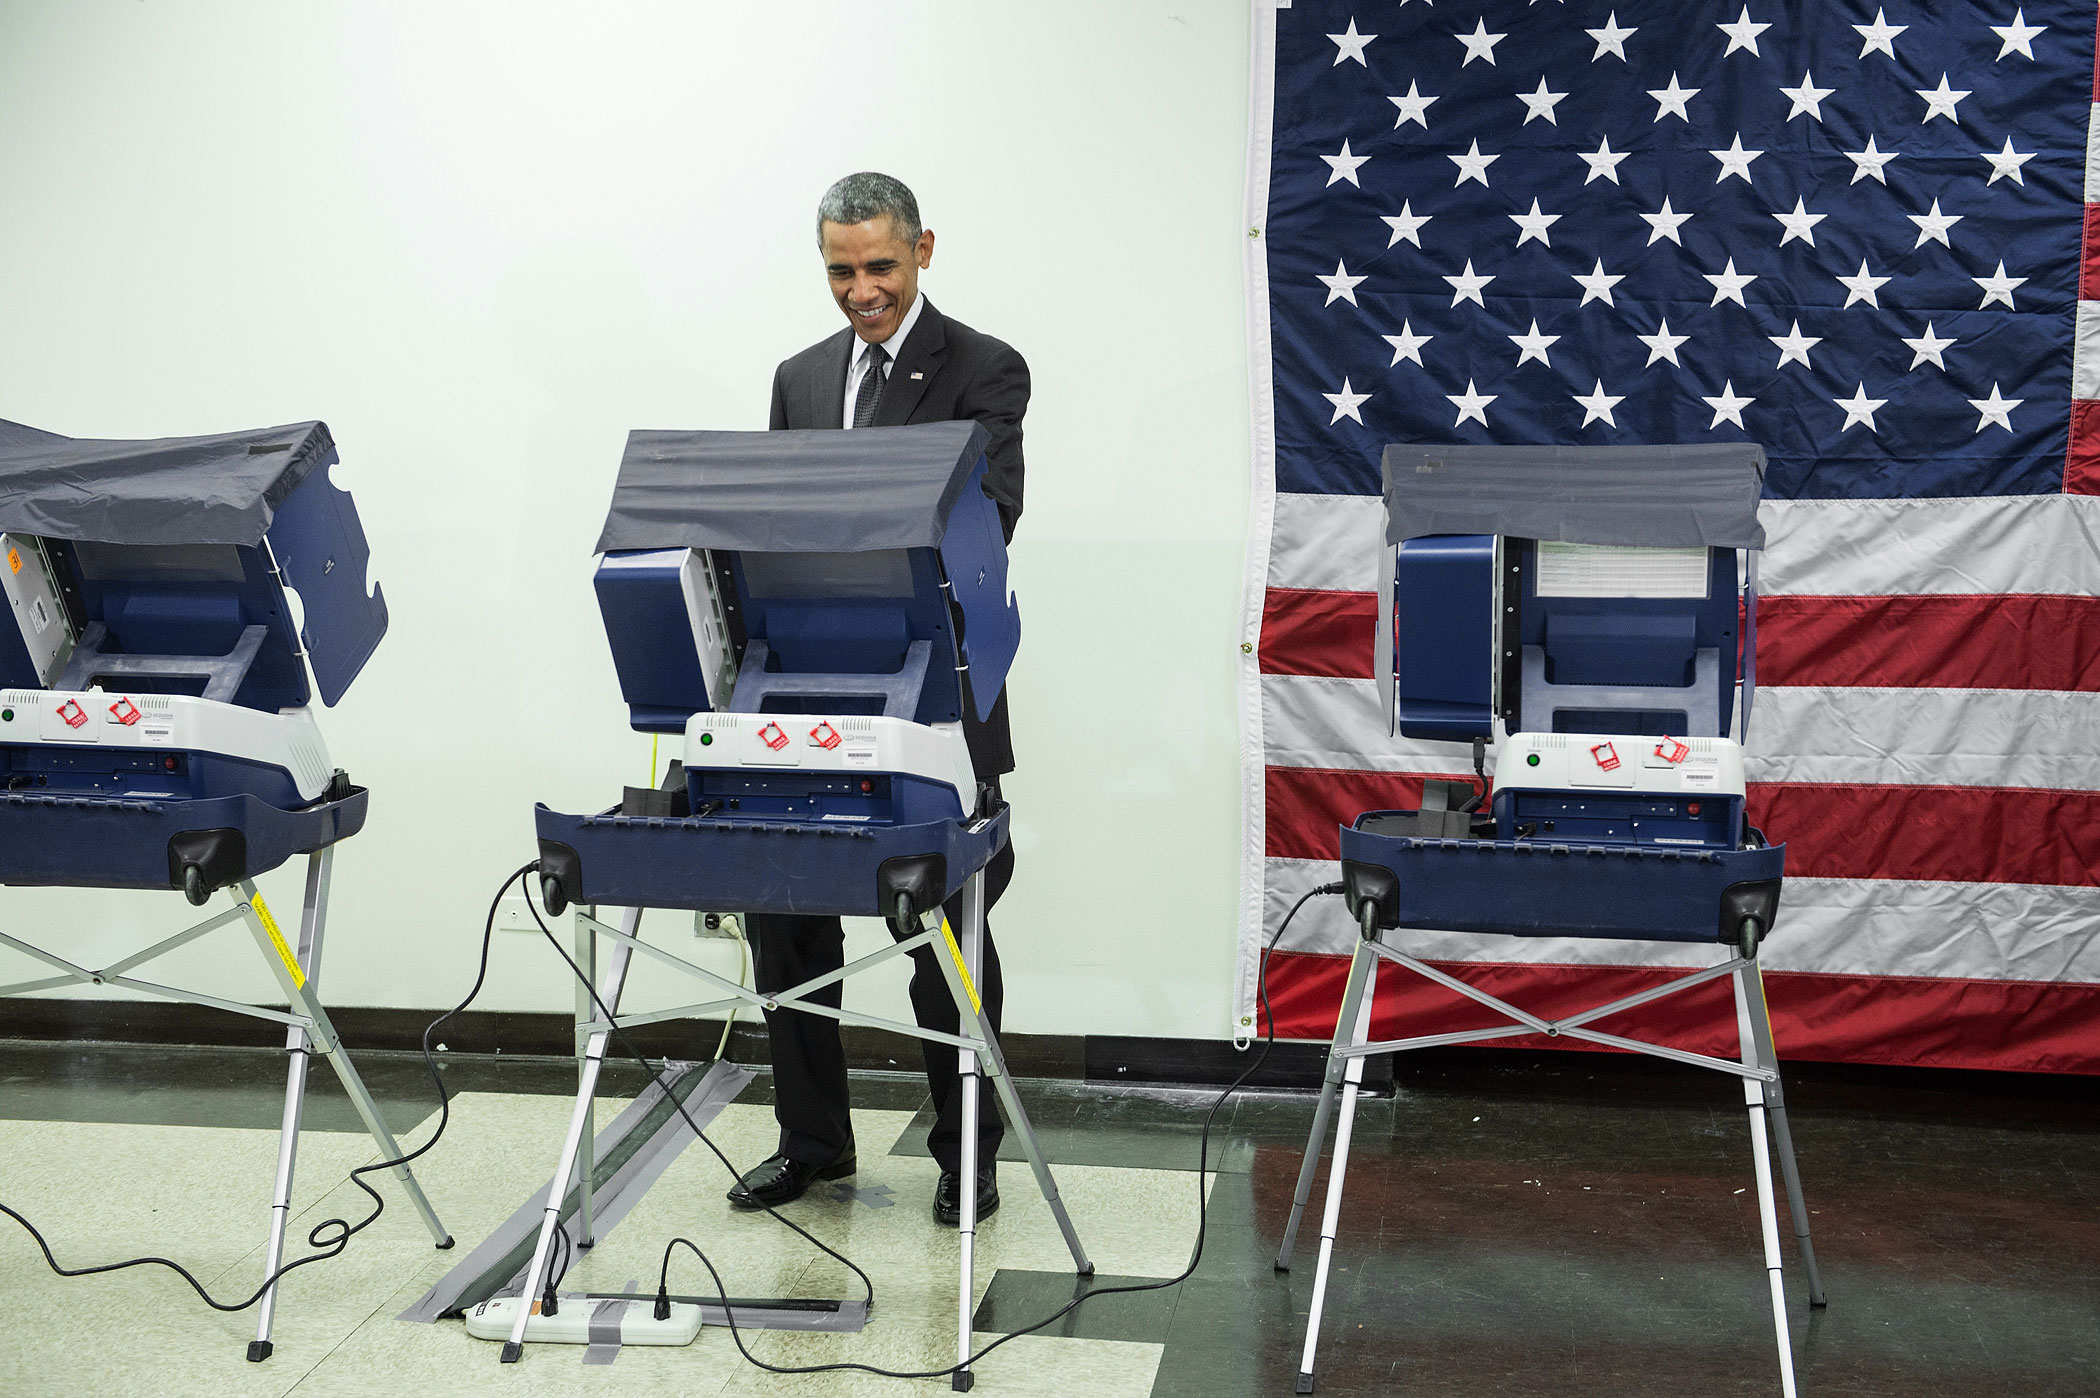 President Barack Obama casts a ballot in early voting for the 2014 midterm elections at the Dr. Martin Luther King Community Service Center October 20, 2014 in Chicago, Illinois. (Brendan Smialowski—AFP/Getty Images)